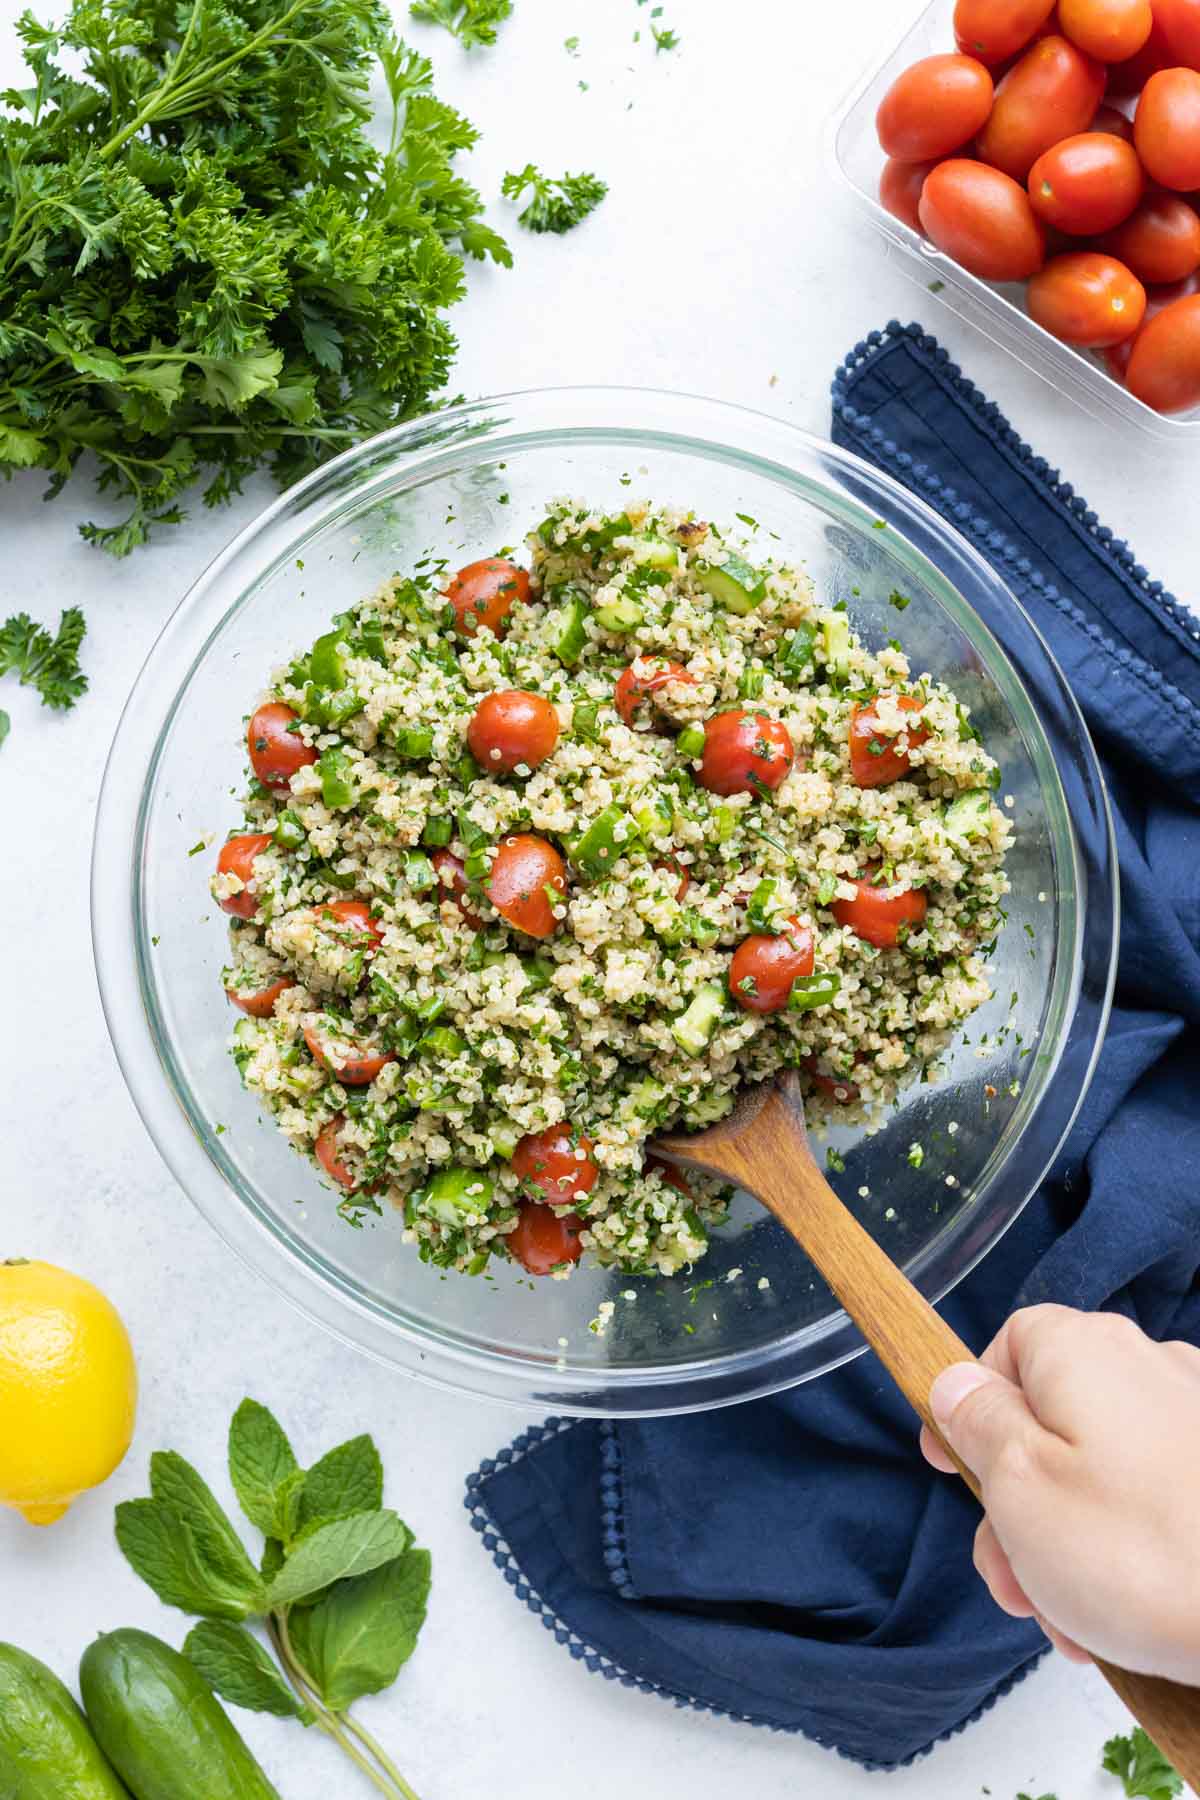 A hand is shown dishing a serving of quinoa tabbouleh